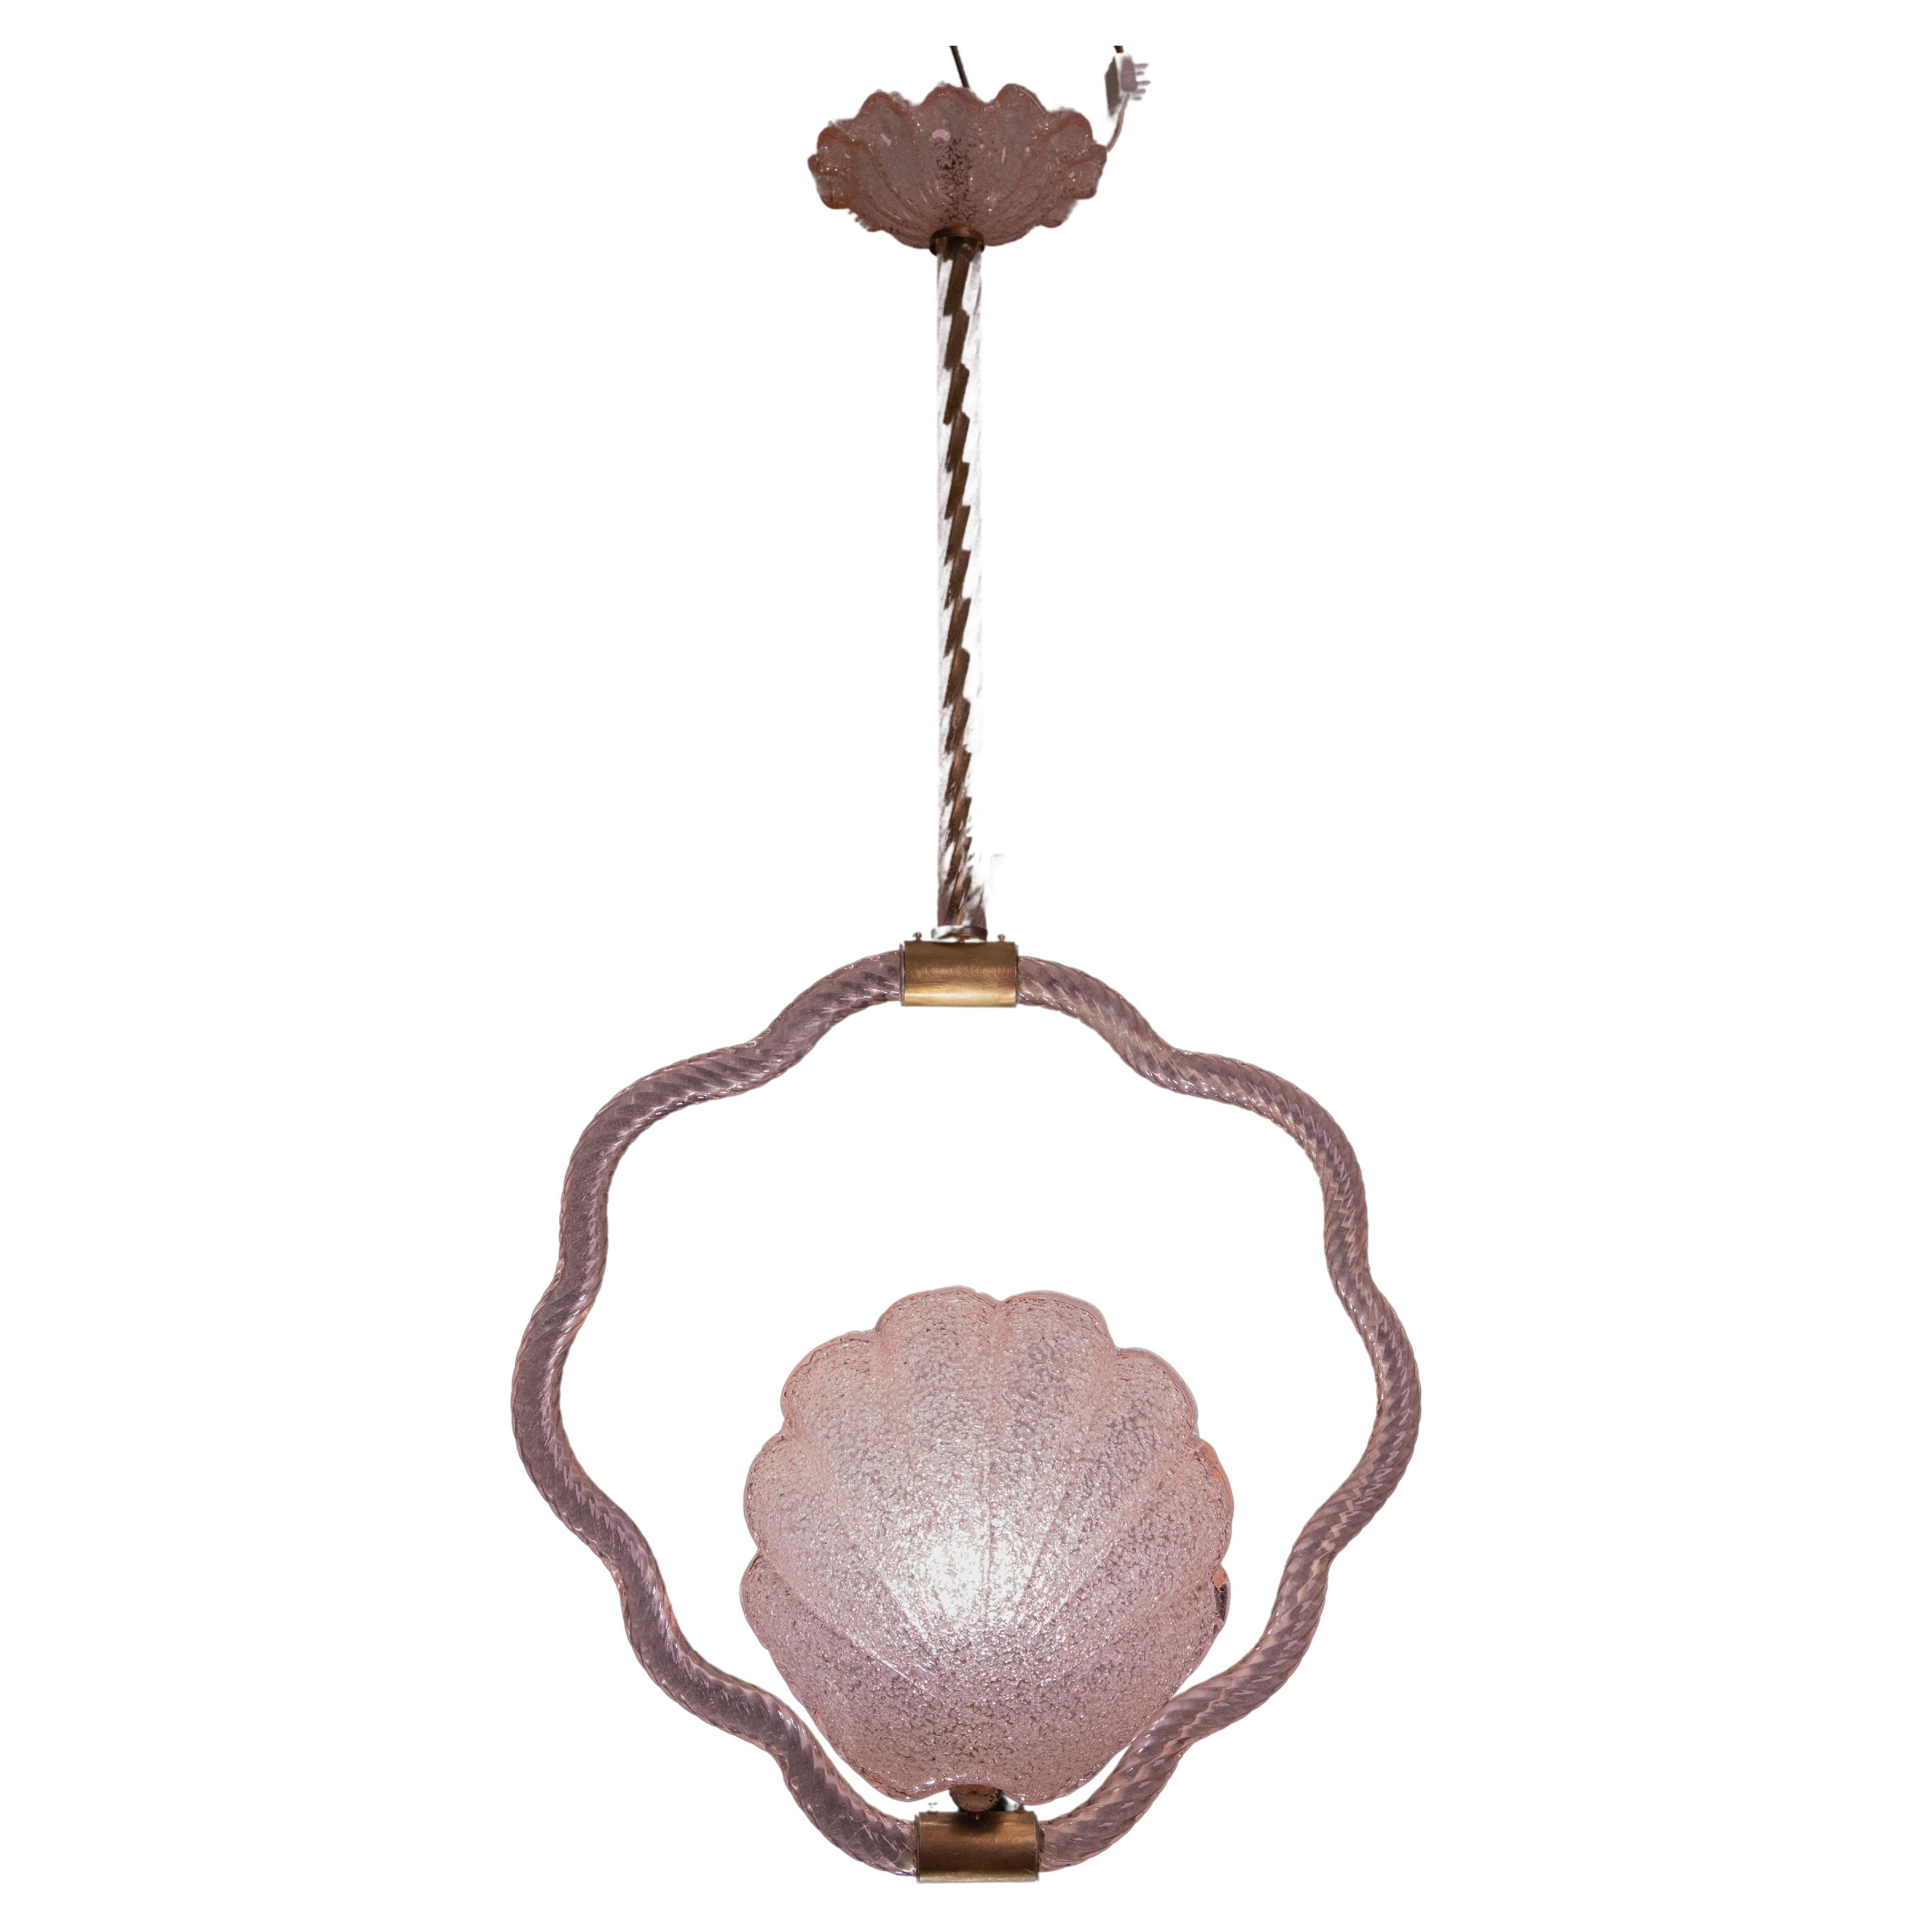 Stunning Murano chandelier by artist Barovier e Toso with rare pink glass.
The pendant consists of 5 glass elements and a brass structure, with the shape of a shell.
It mounts a European standard e27 lamp.
It measures 100 centimetres in height